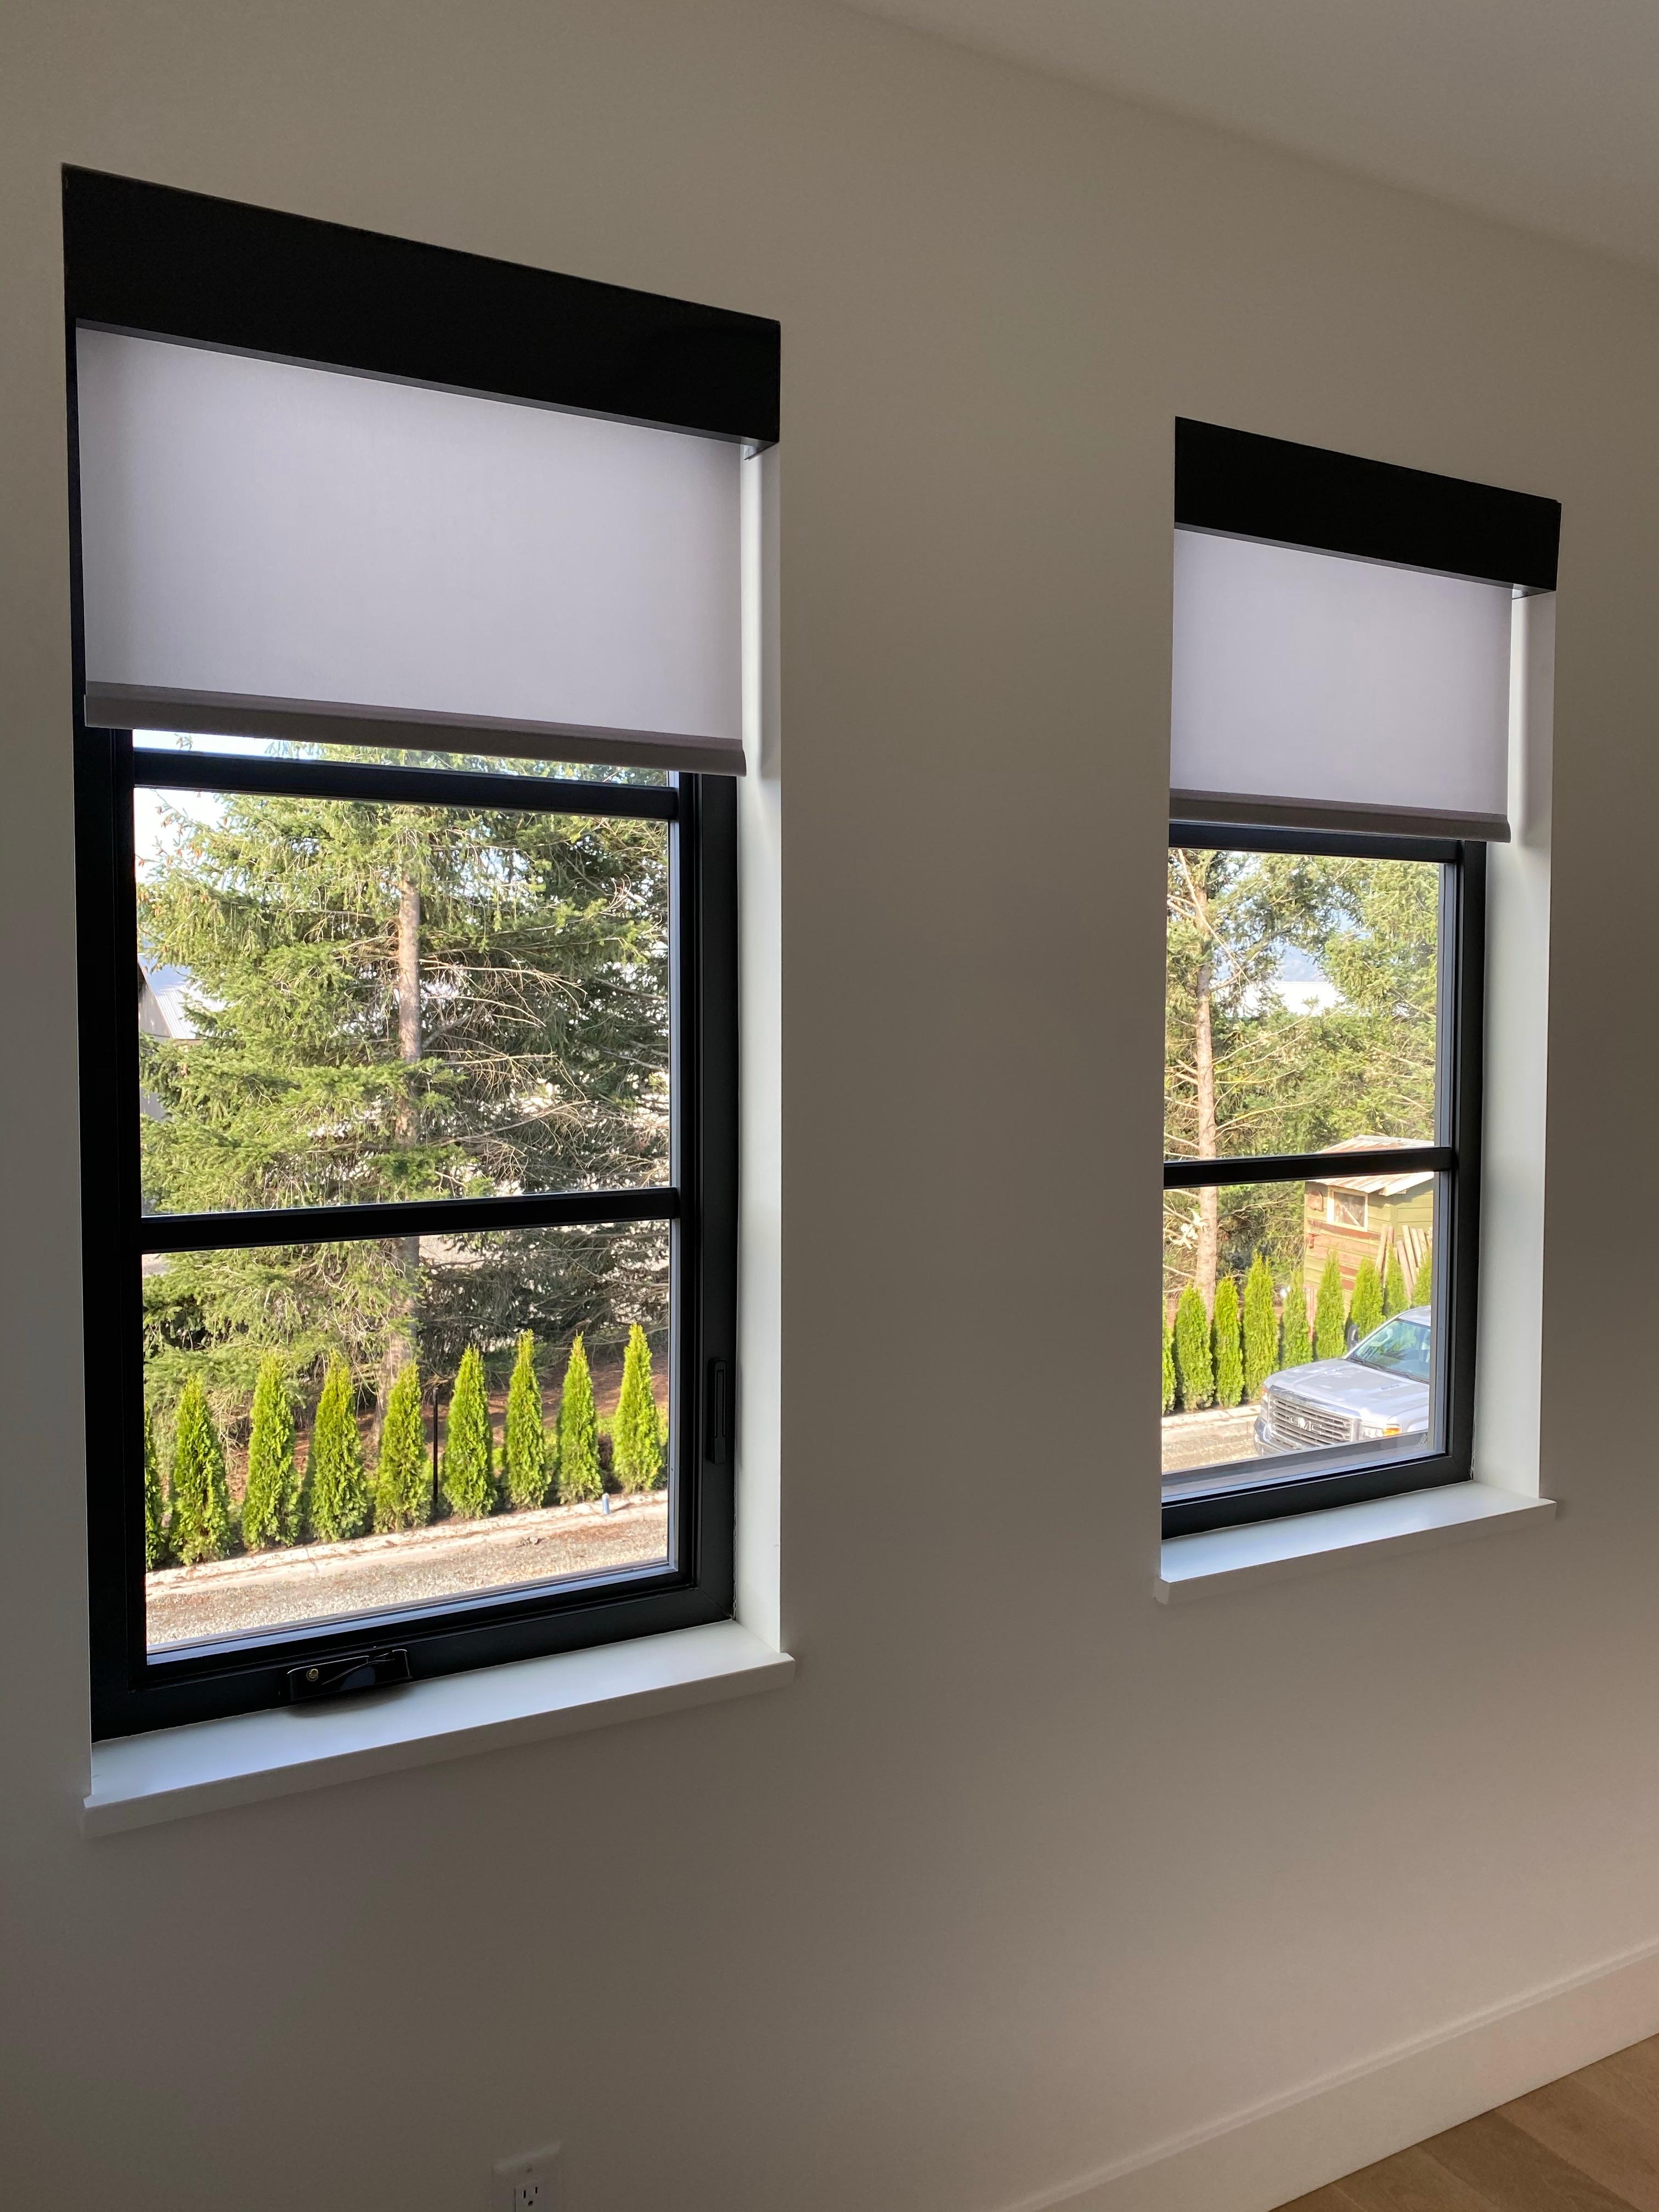 We can match your window trim with our metal fascias! Shade colour can be different if you like. Budget Blinds of Chilliwack, Hope and Harrison Chilliwack (604)824-0375